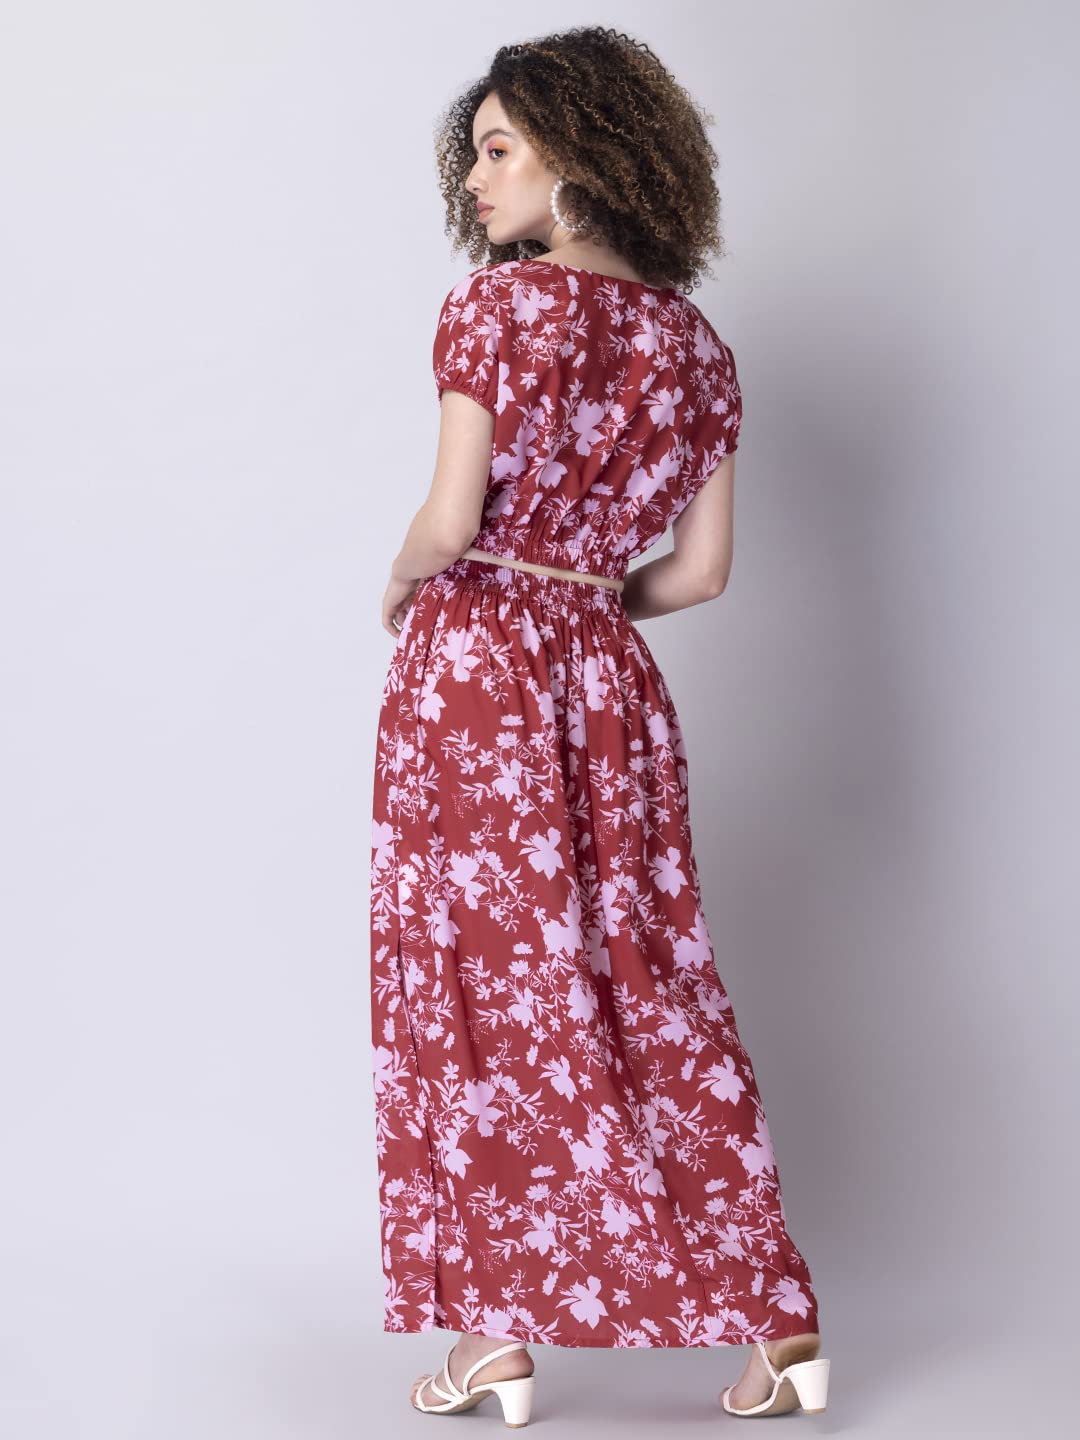 FabAlley Crepe Red Floral Crop Top and Skirt Co-ord Set 